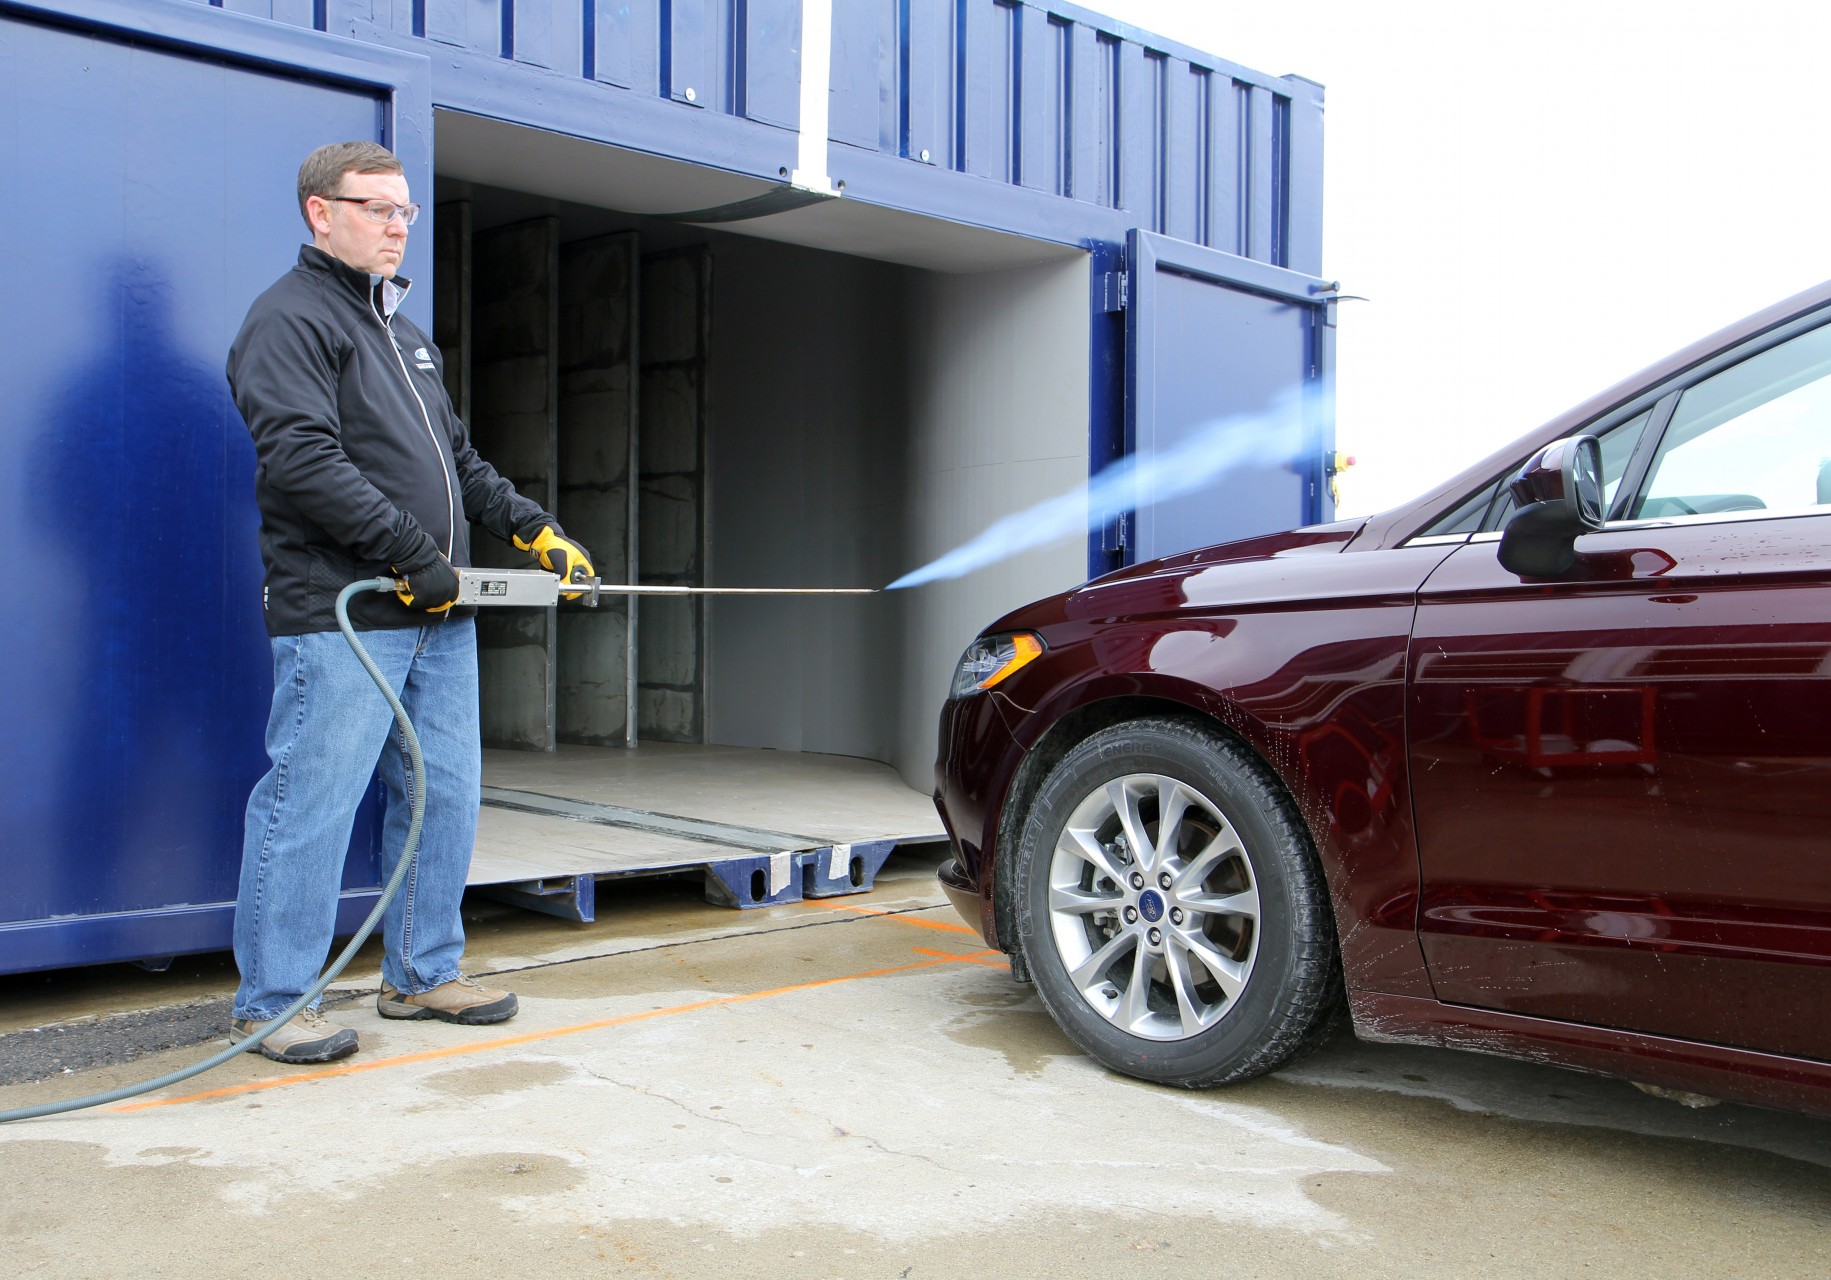 Ford engineers tests wind noise at its portable aeroacostic wind tunnel facility